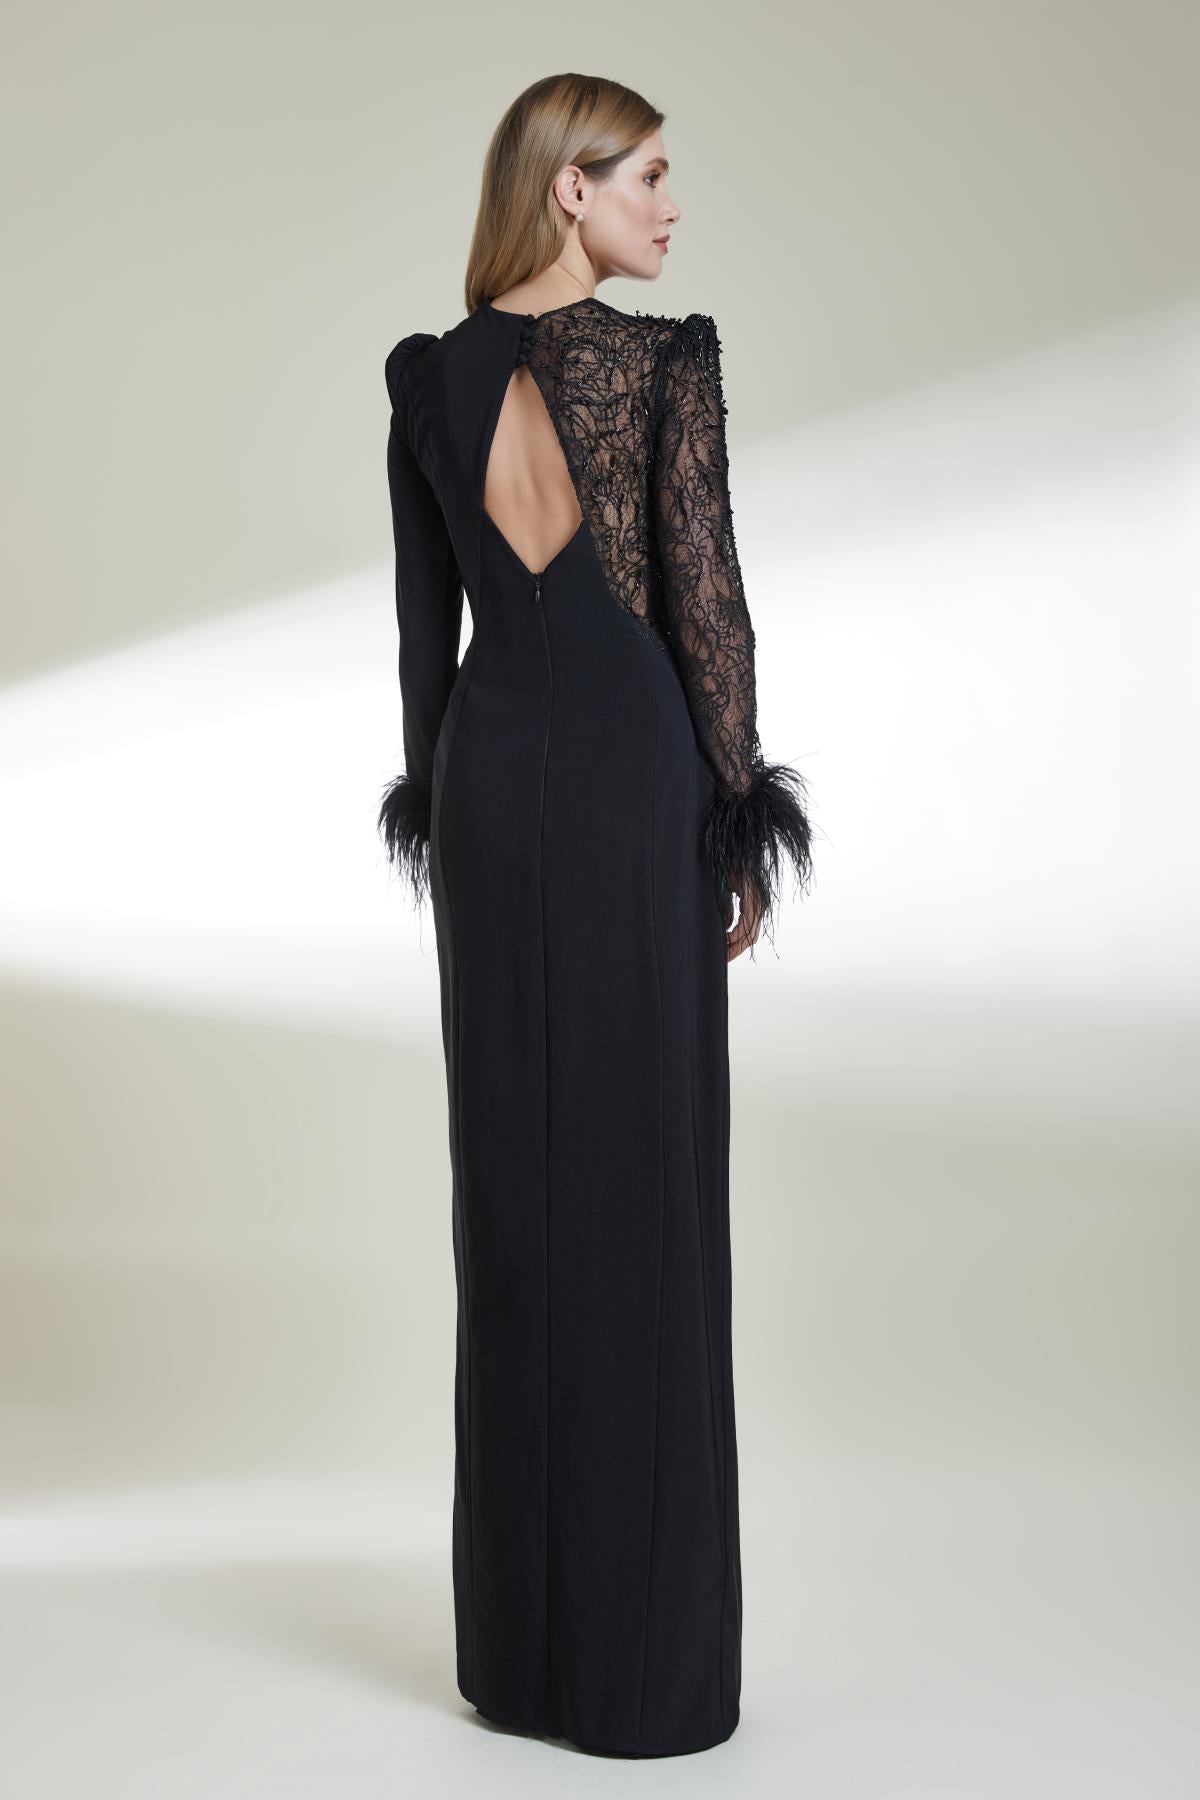 Lace Draped Long Evening Dress with Back Window